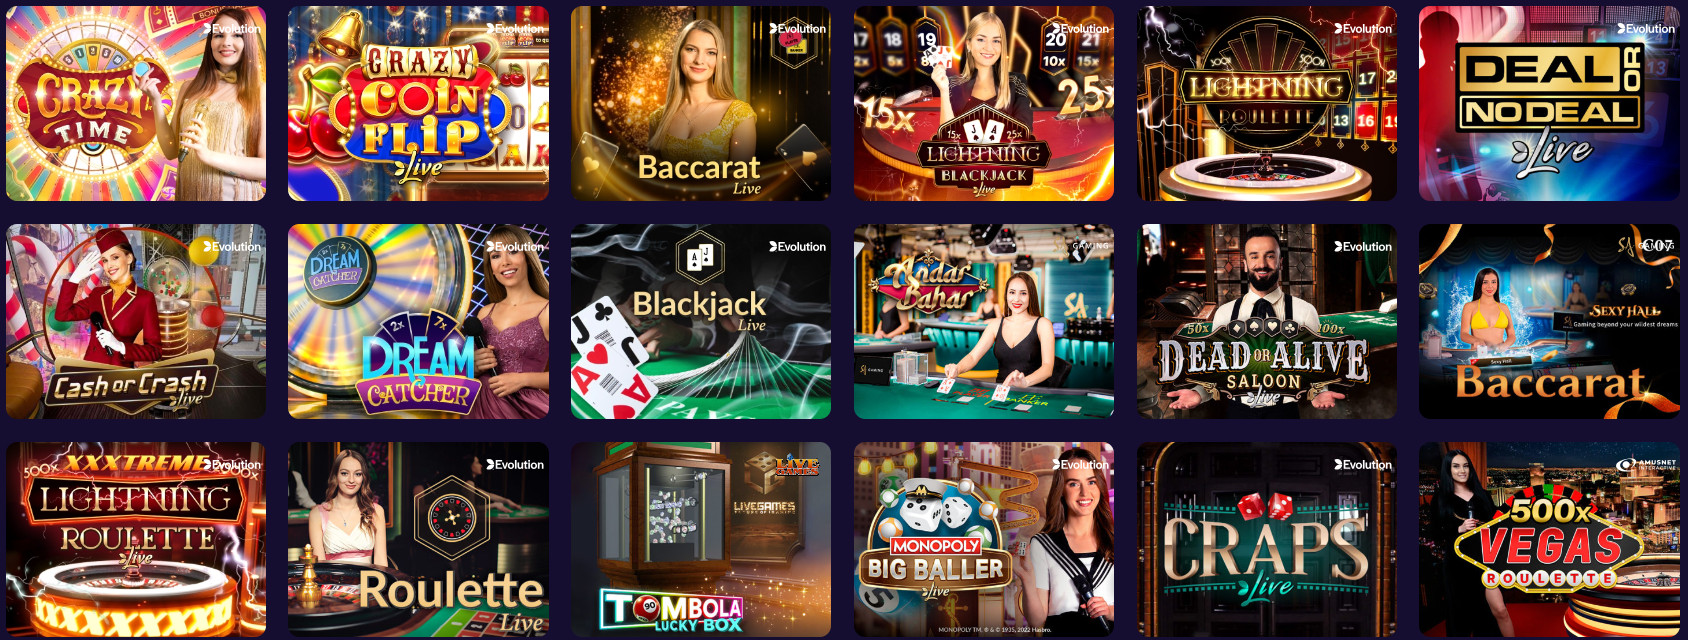 Live Casino Section at iWild Casino